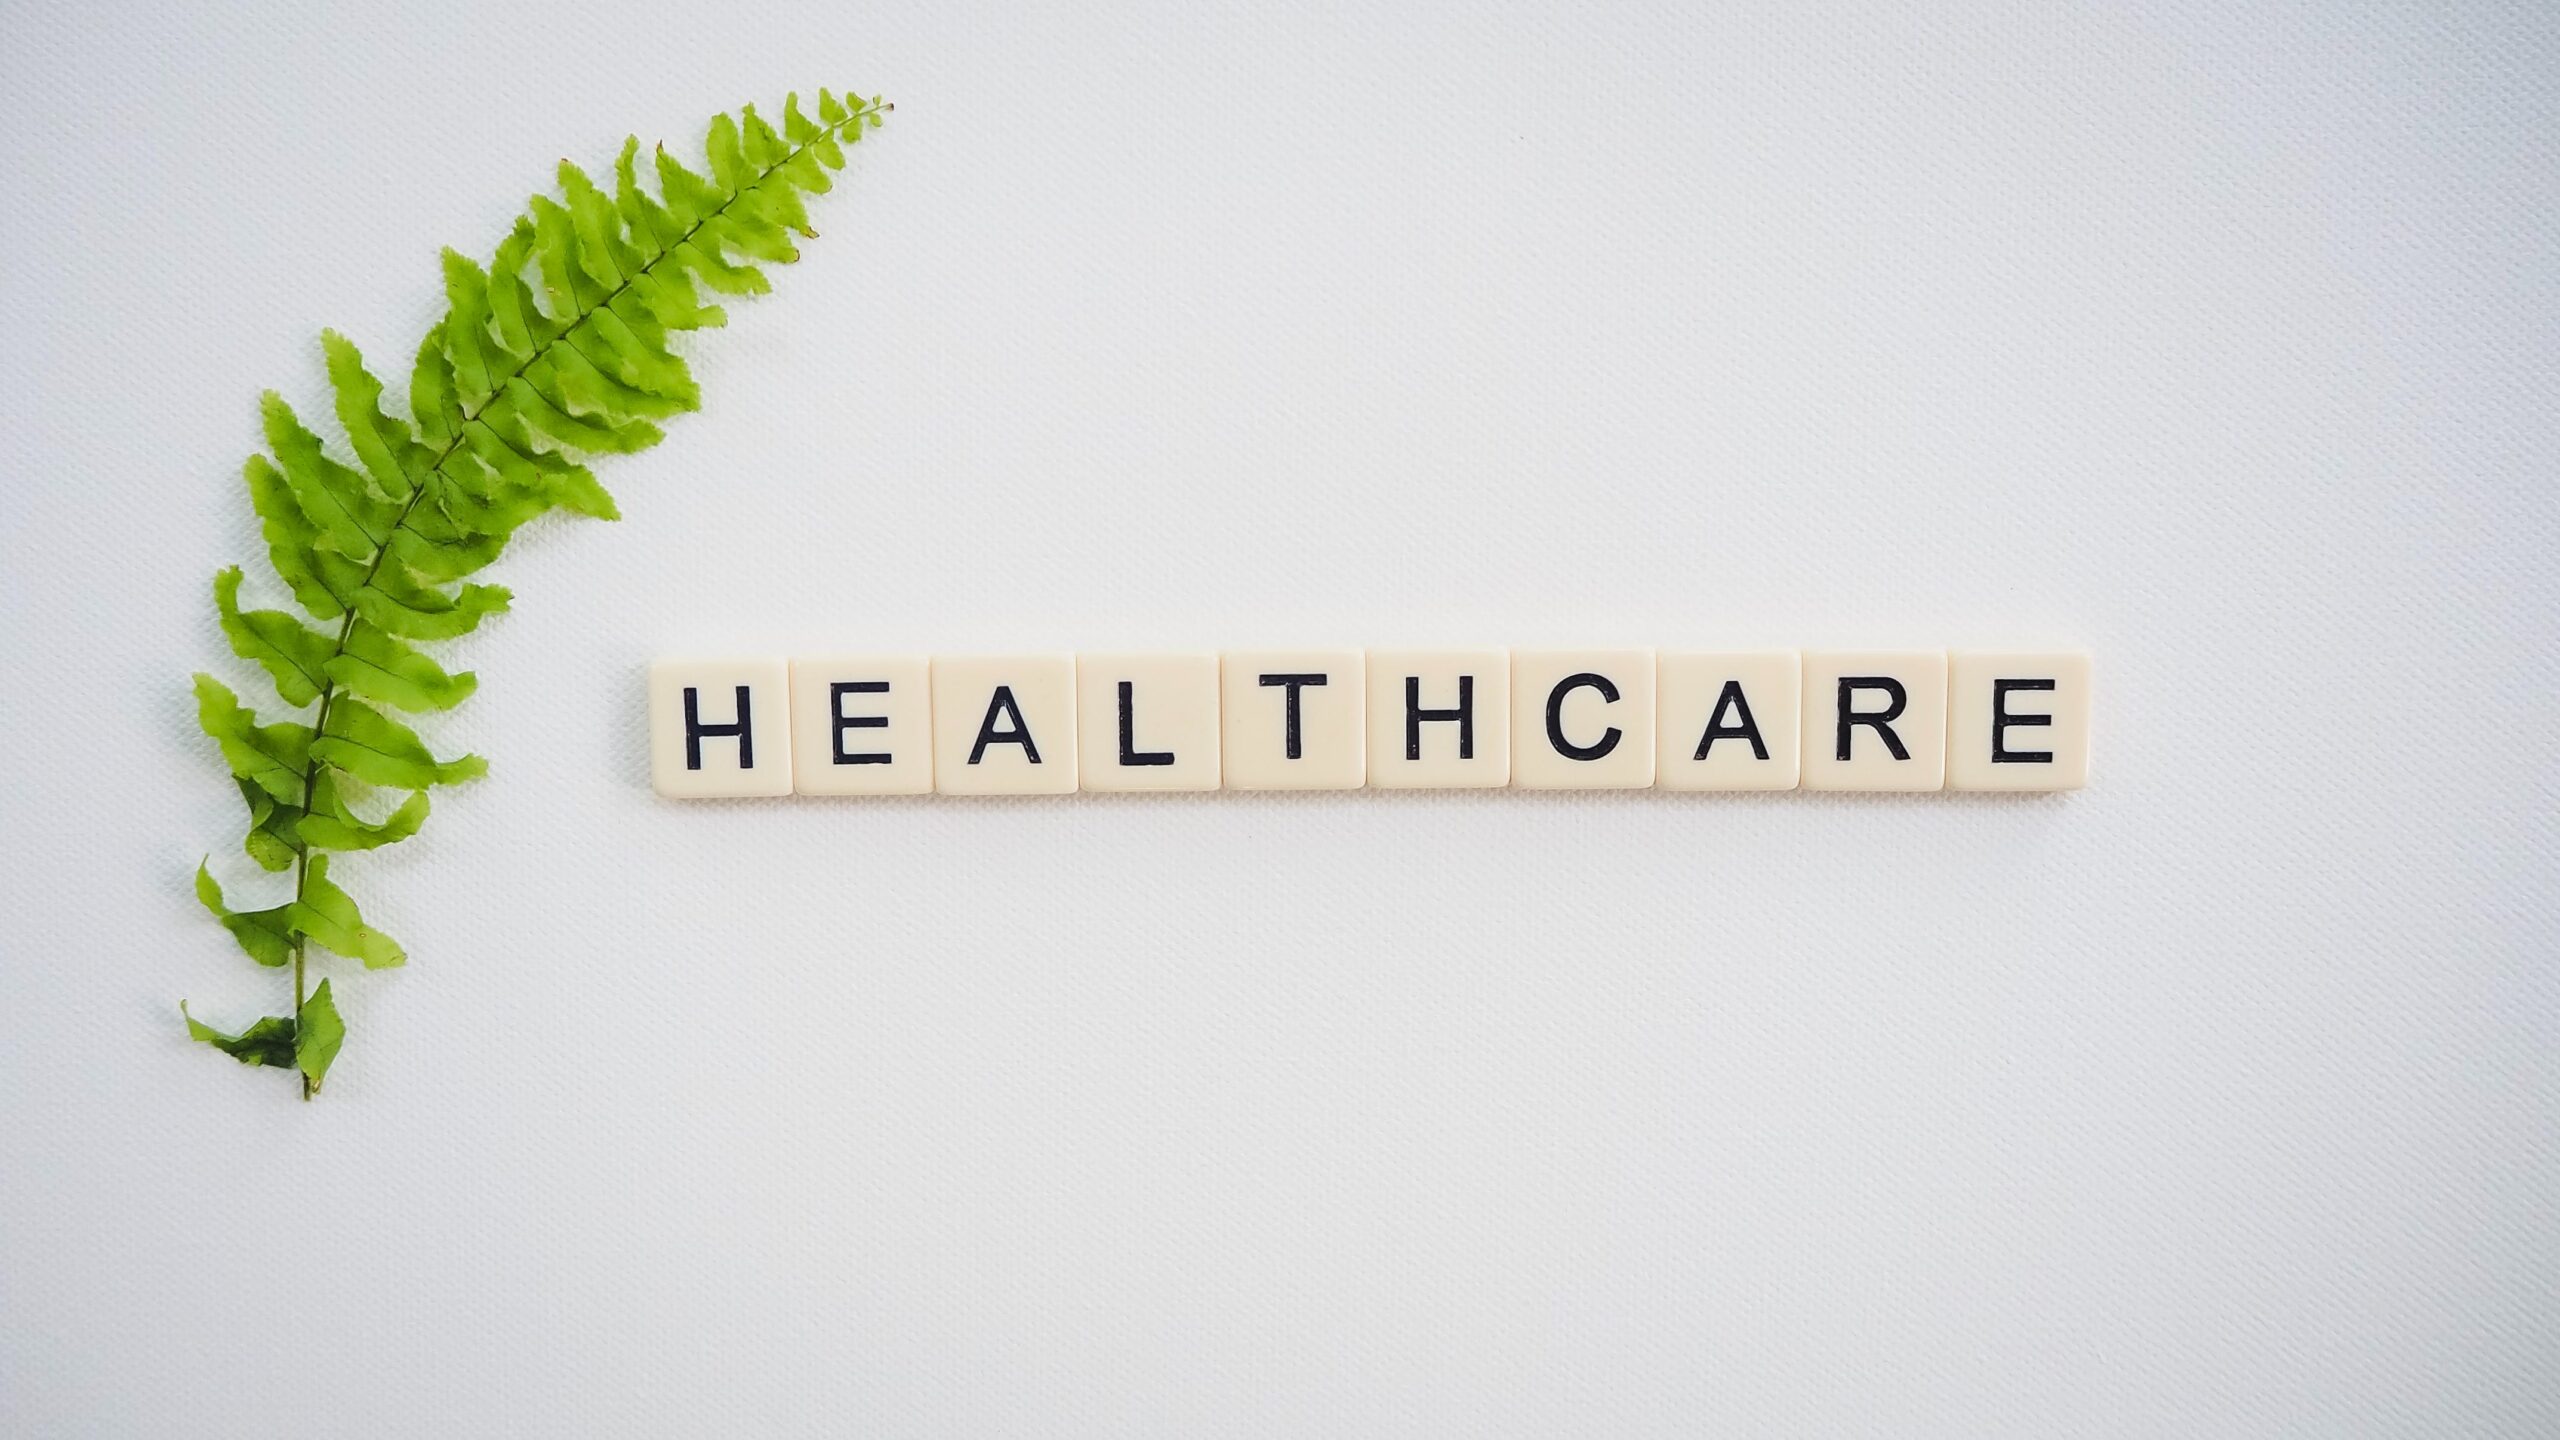 5 Essential Tips for Marketing Your Healthcare Brand